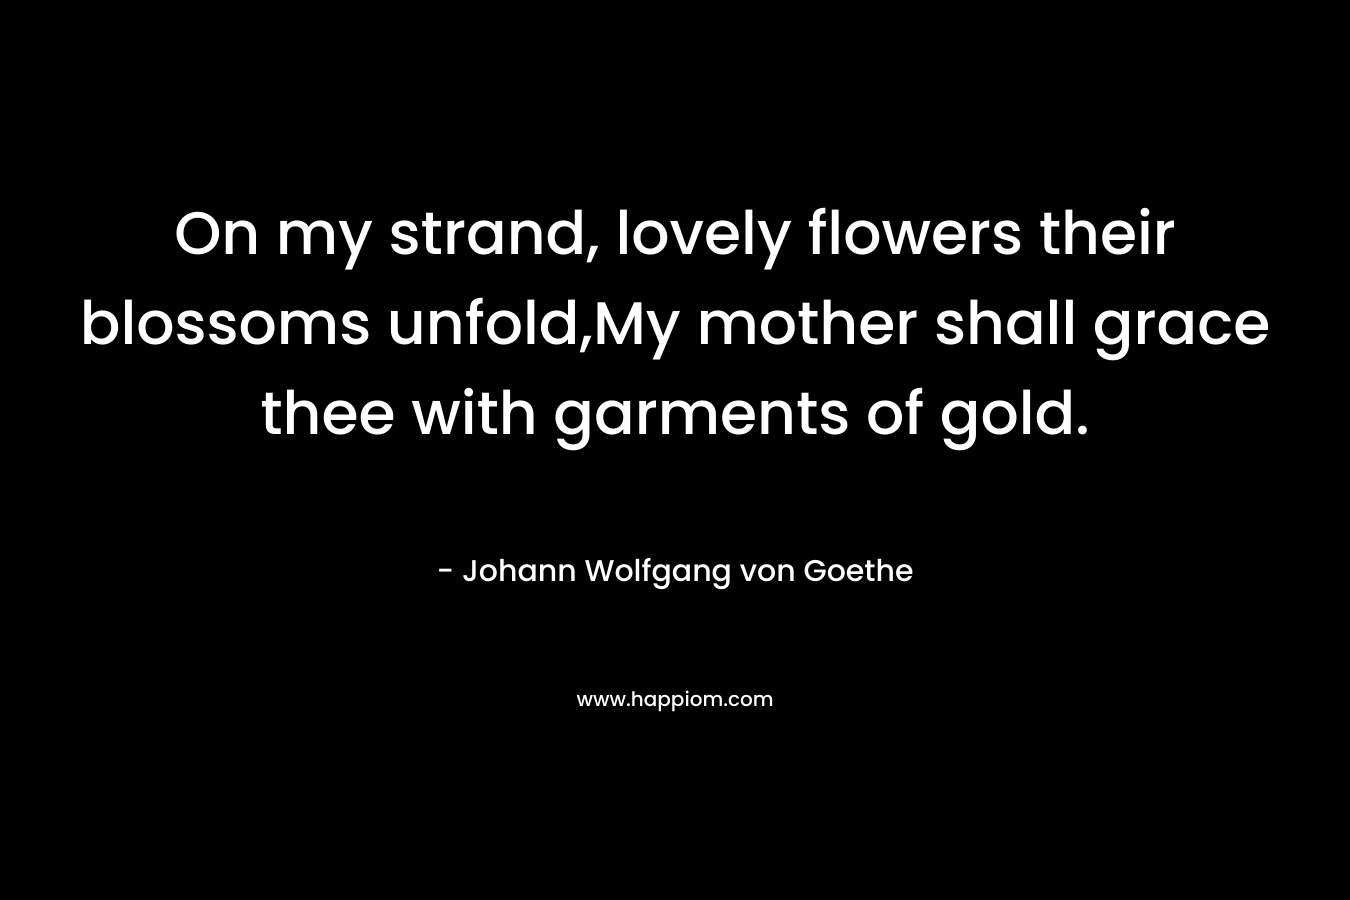 On my strand, lovely flowers their blossoms unfold,My mother shall grace thee with garments of gold. – Johann Wolfgang von Goethe